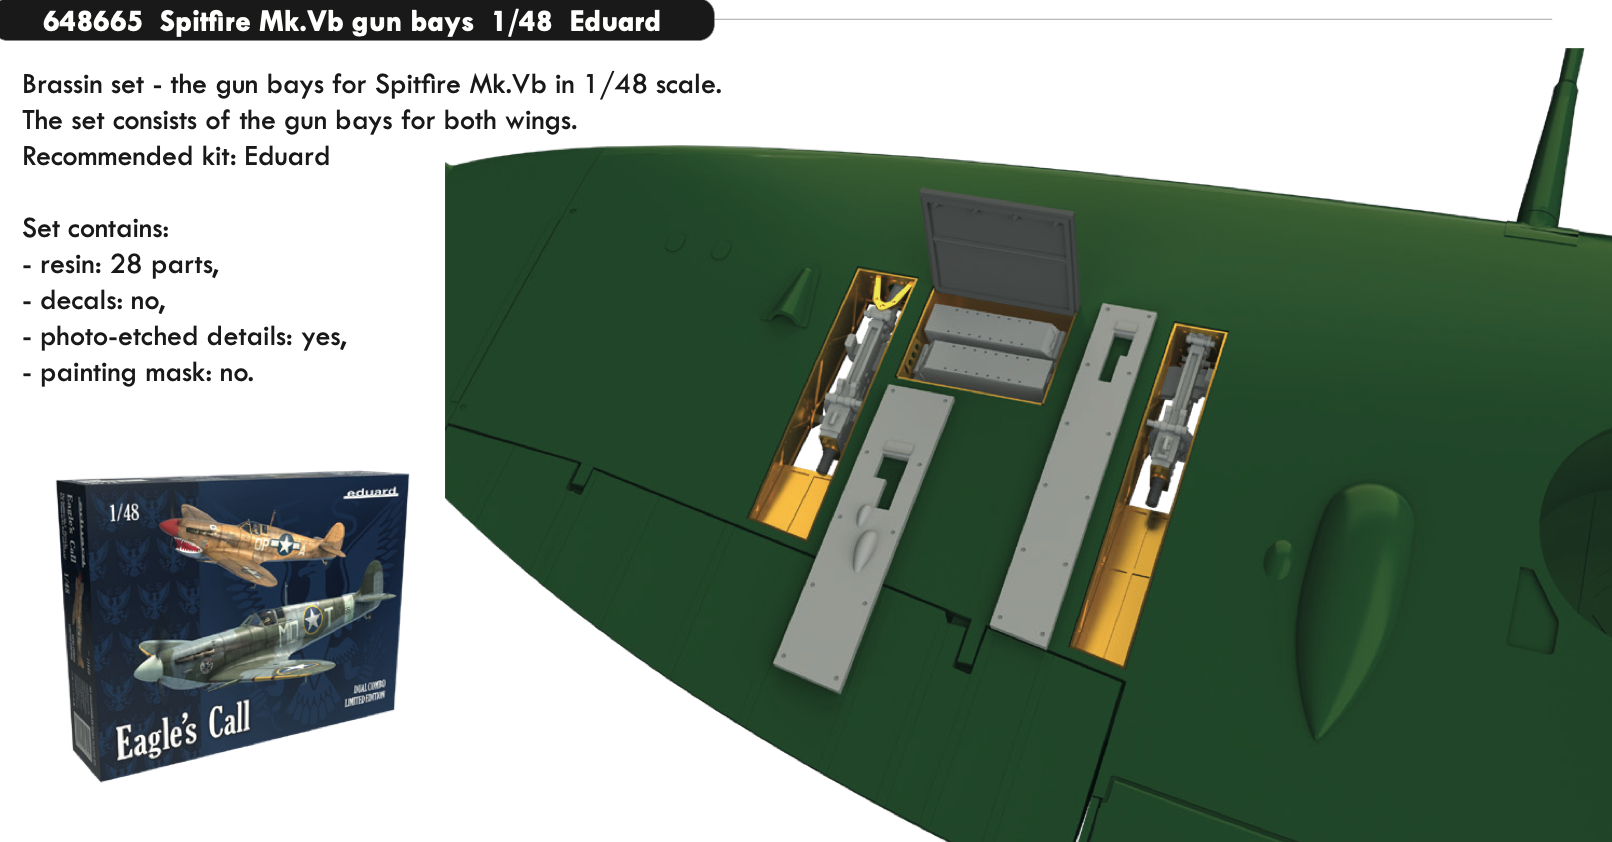 Additions (3D resin printing) 1/48        Supermarine Spitfire Mk.Vb gun bays (designed to be used with Eduard kits) 